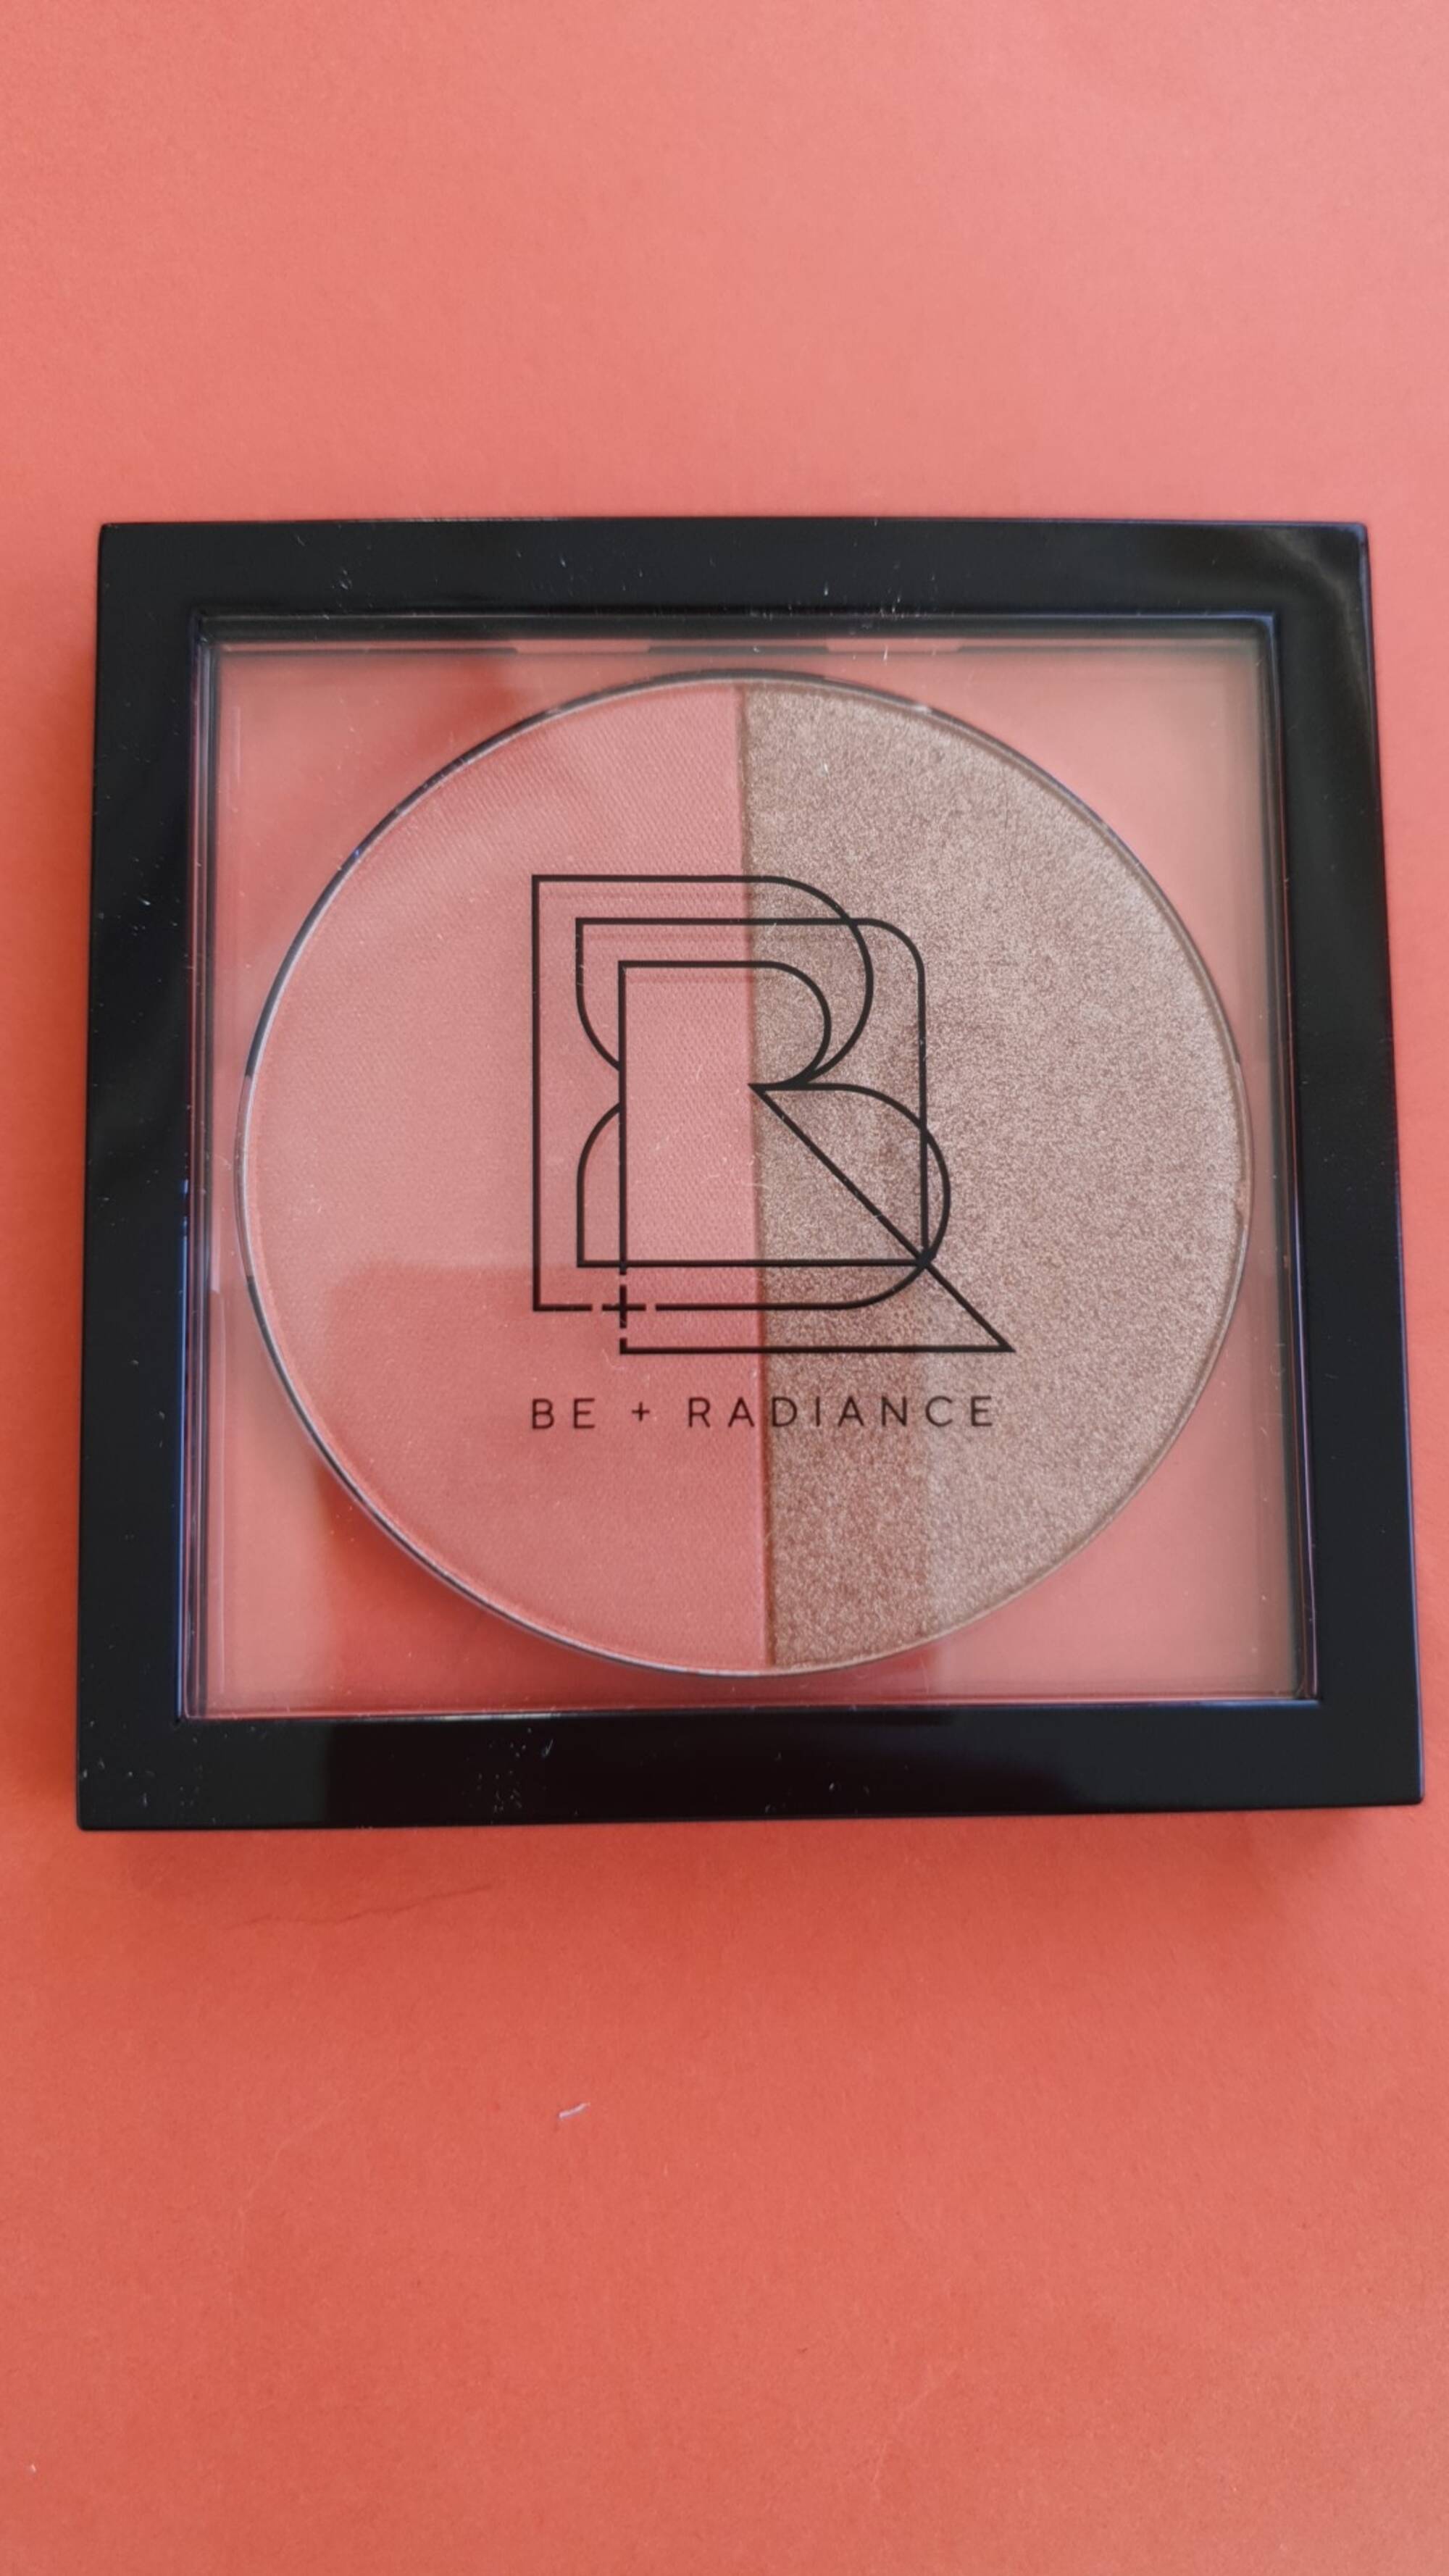 BE + RADIANCE - Duo blush + enlumineur